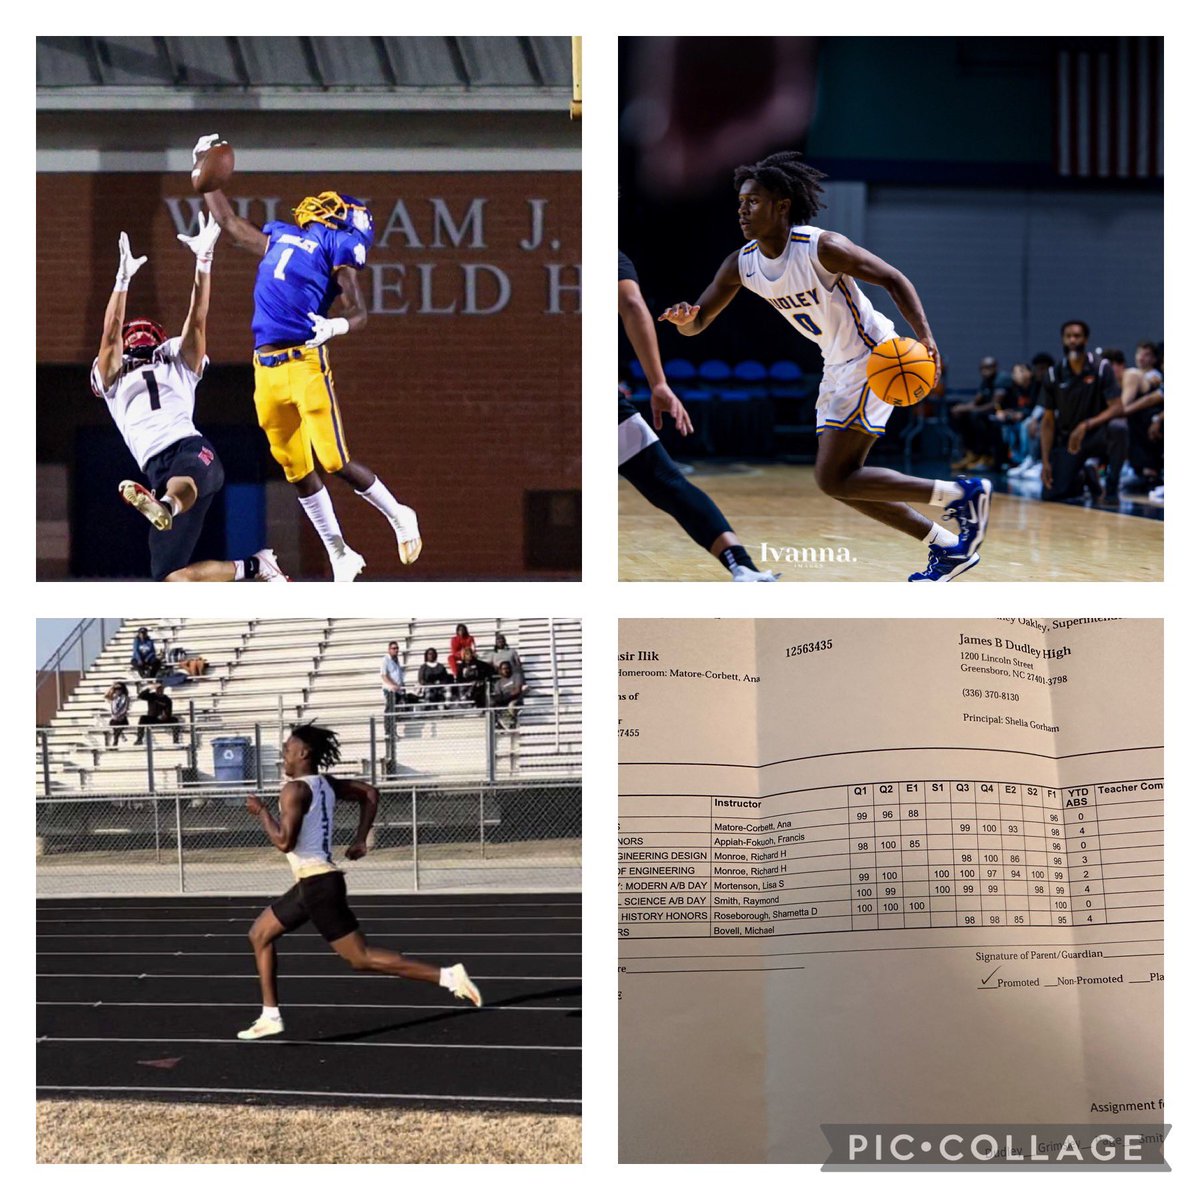 “If you strive for excellence, success will follow.”!!! Keep going my boy!!! ❤️#walkbyfaithnotbysight🙏🏾 #studentathlete #apclasses #honorclasses #ahonorrollstudent #doallthingsthroughchrist 🙌🏾 #youvsyou @NasNewkirk